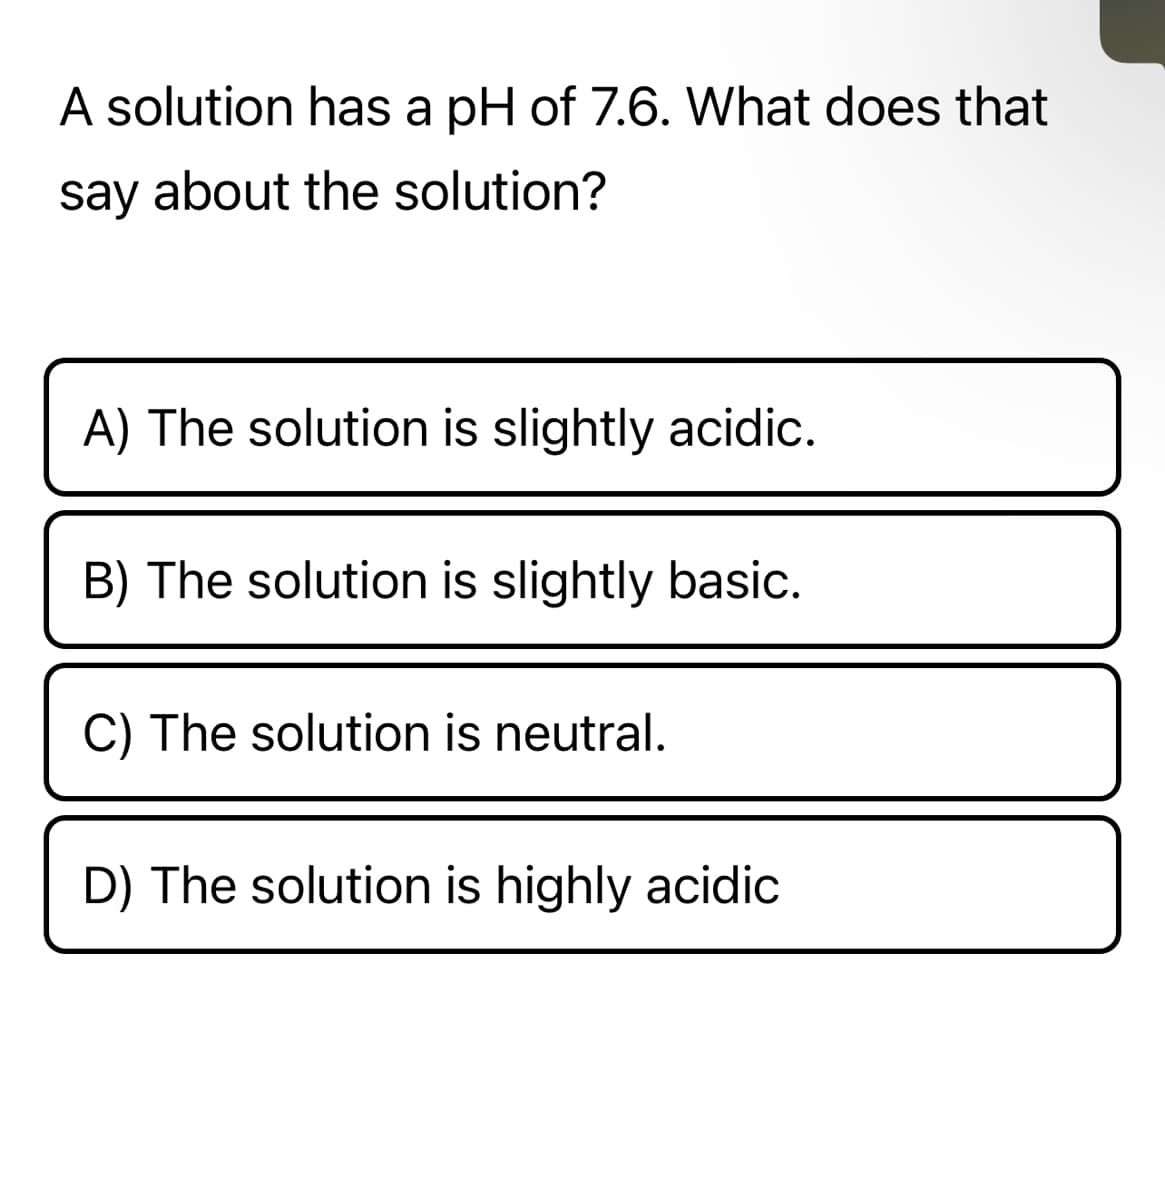 A solution has a pH of 7.6. What does that
say about the solution?
A) The solution is slightly acidic.
B) The solution is slightly basic.
C) The solution is neutral.
D) The solution is highly acidic
T